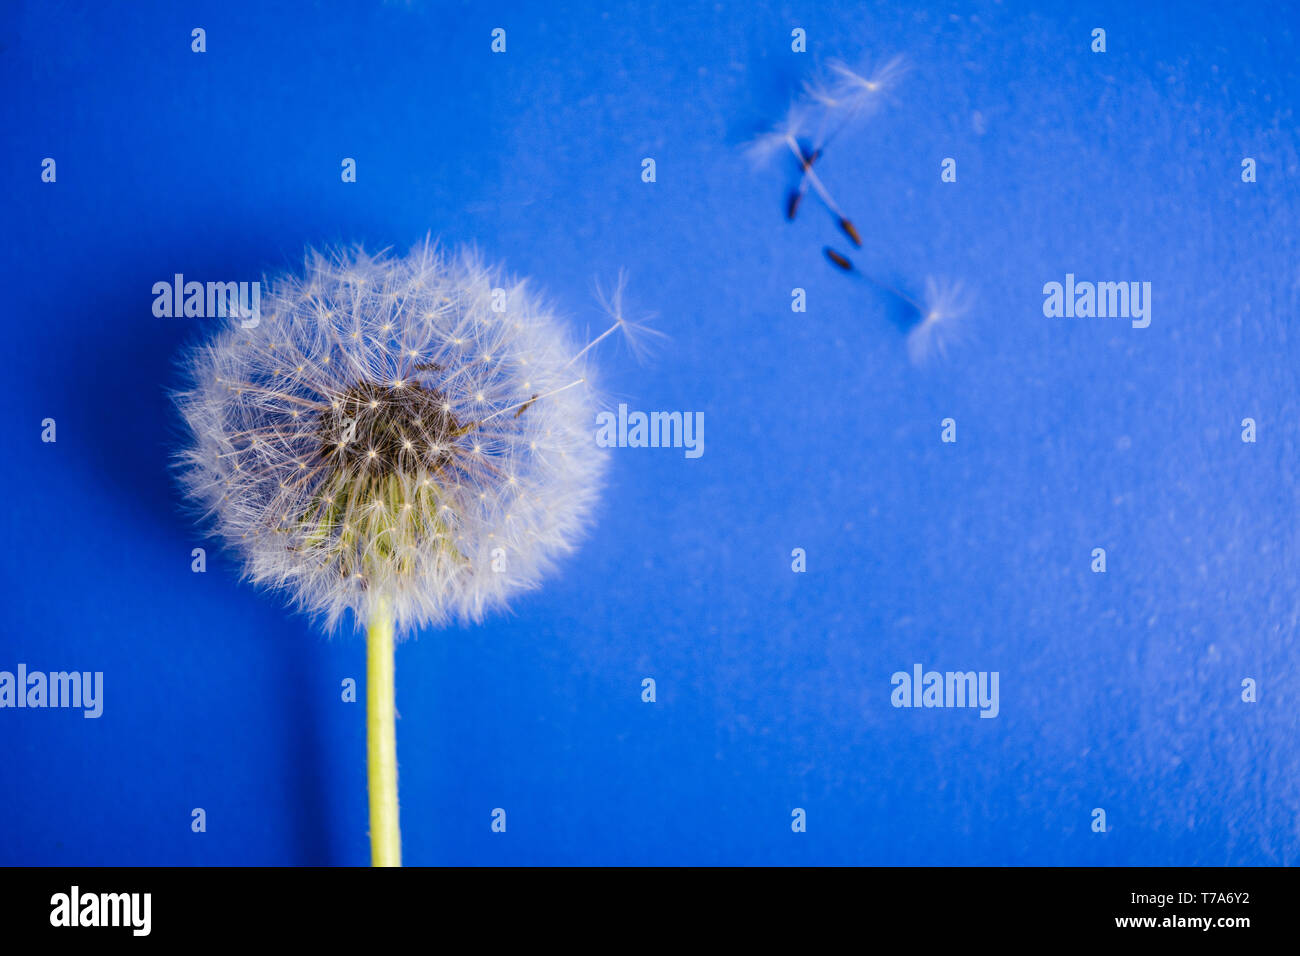 Dandelion flowers and seeds on blue background Stock Photo